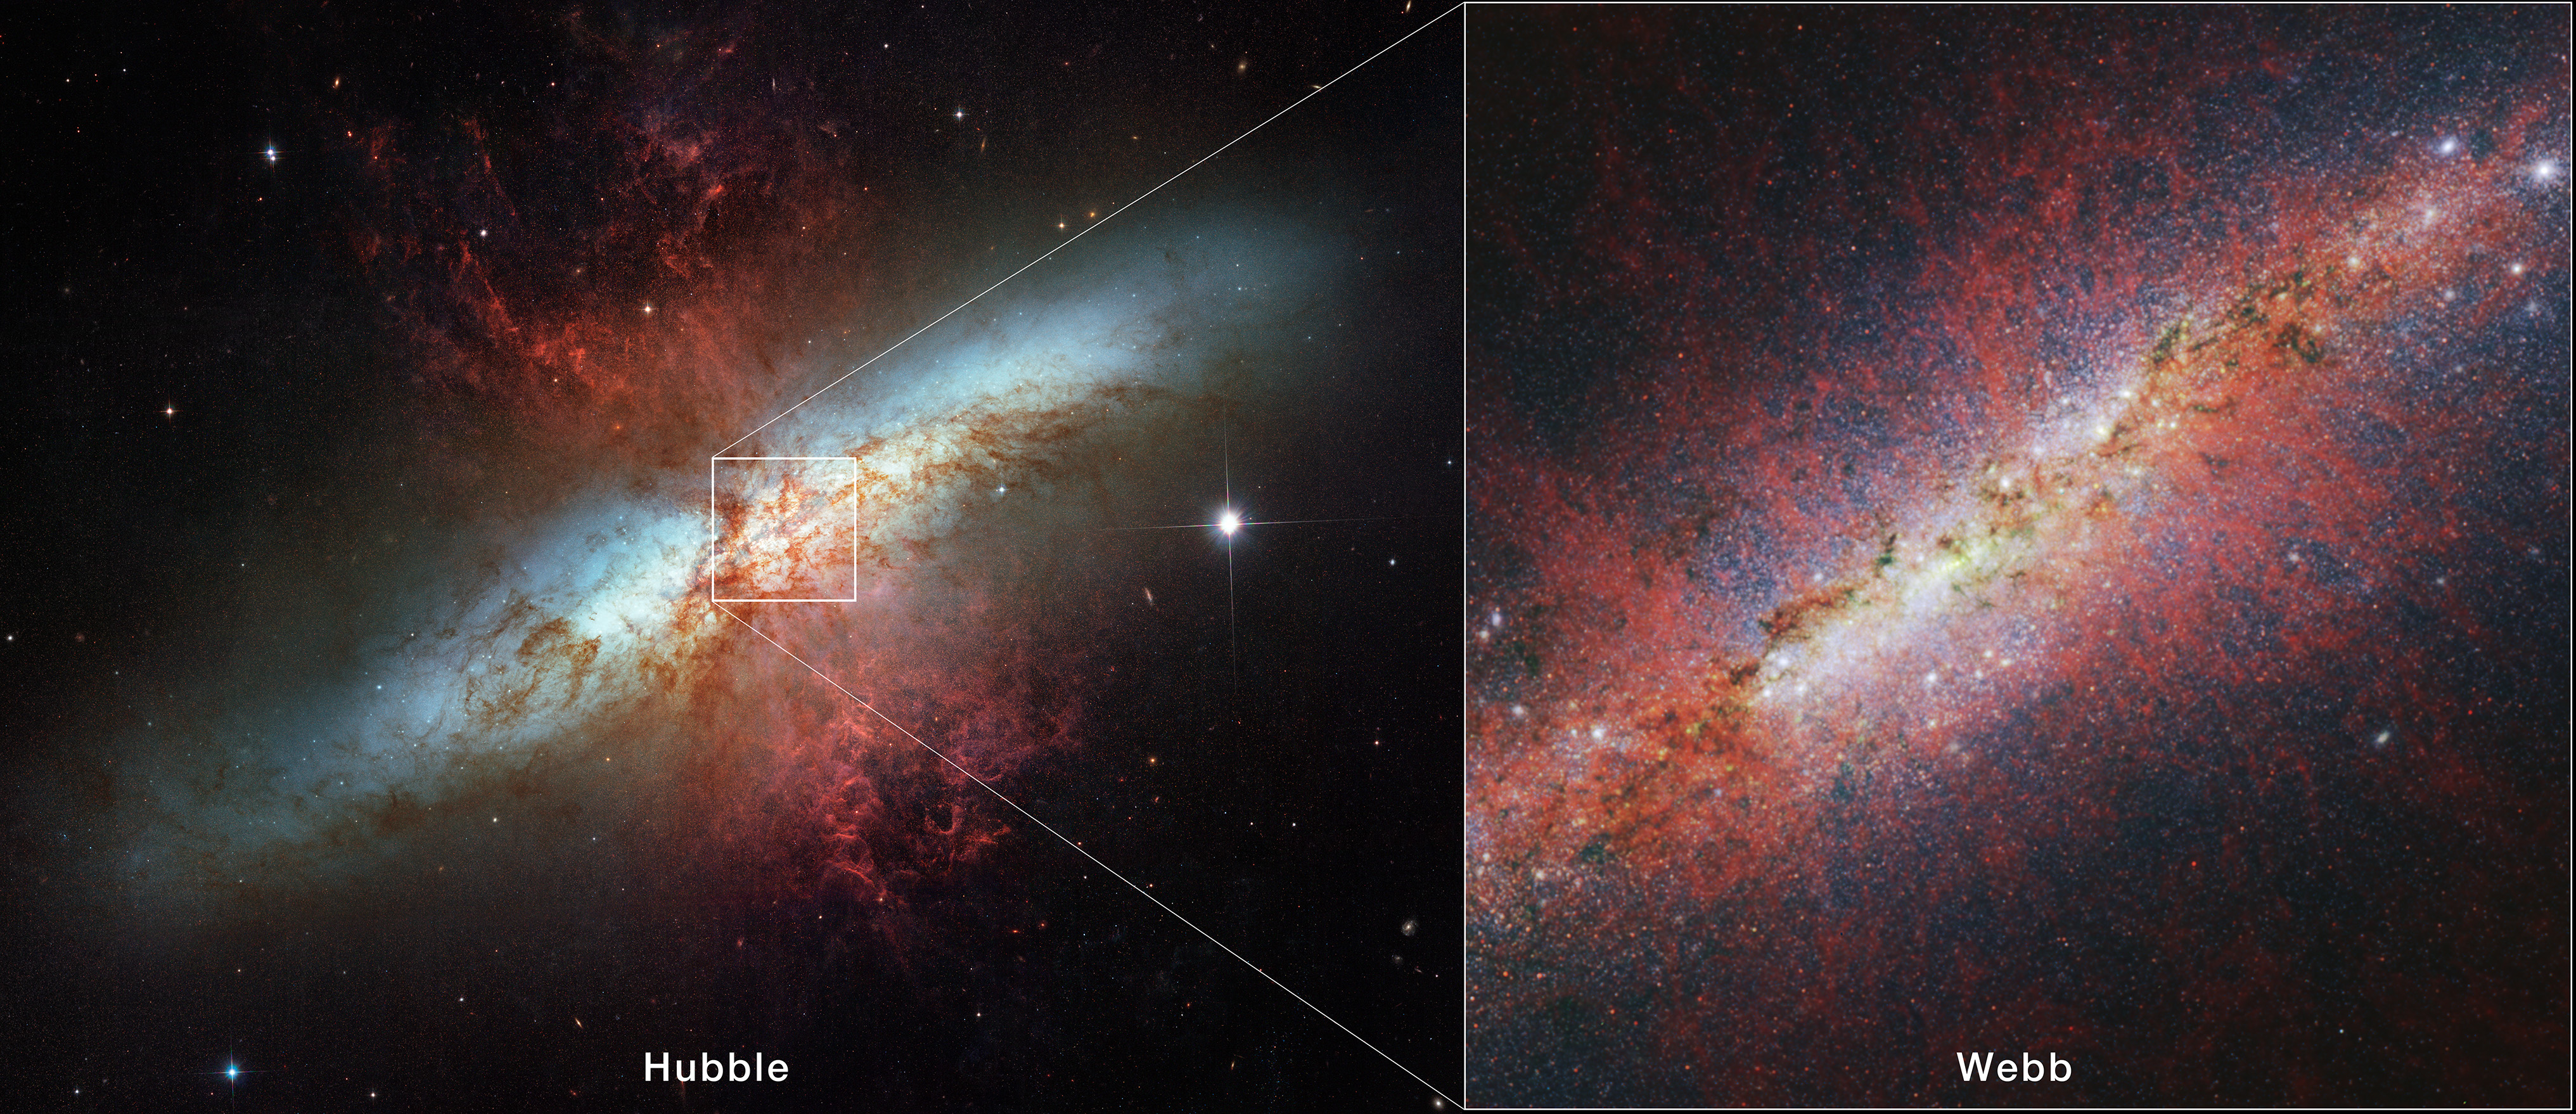 Left: Messier 82 as imaged by NASA's Hubble Space Telescope. Hour-glass-shaped red plumes of gas are shooting outward from above and below a bright blue, disk-shaped center of a galaxy. This galaxy is surrounded by many white stars and set against the black background of space. A small square highlights the section that the image on the right shows in greater detail. White text at bottom reads &quot;Hubble.&quot; Right: A section of Messier 82 as imaged by NASA's James Webb Space Telescope. An edge-on spiral starburst galaxy with a bright white, glowing core set against the black background of space. A white band of the edge-on disk extends from lower left to upper right. Dark brown tendrils of dust are scattered thinly along this band. Many white points in various sizes – stars or star clusters – are scattered throughout the image, but are most heavily concentrated toward the center. Many clumpy, red filaments extend vertically above and below the galaxy’s plane. White text at bottom reads &quot;Webb.&quot;